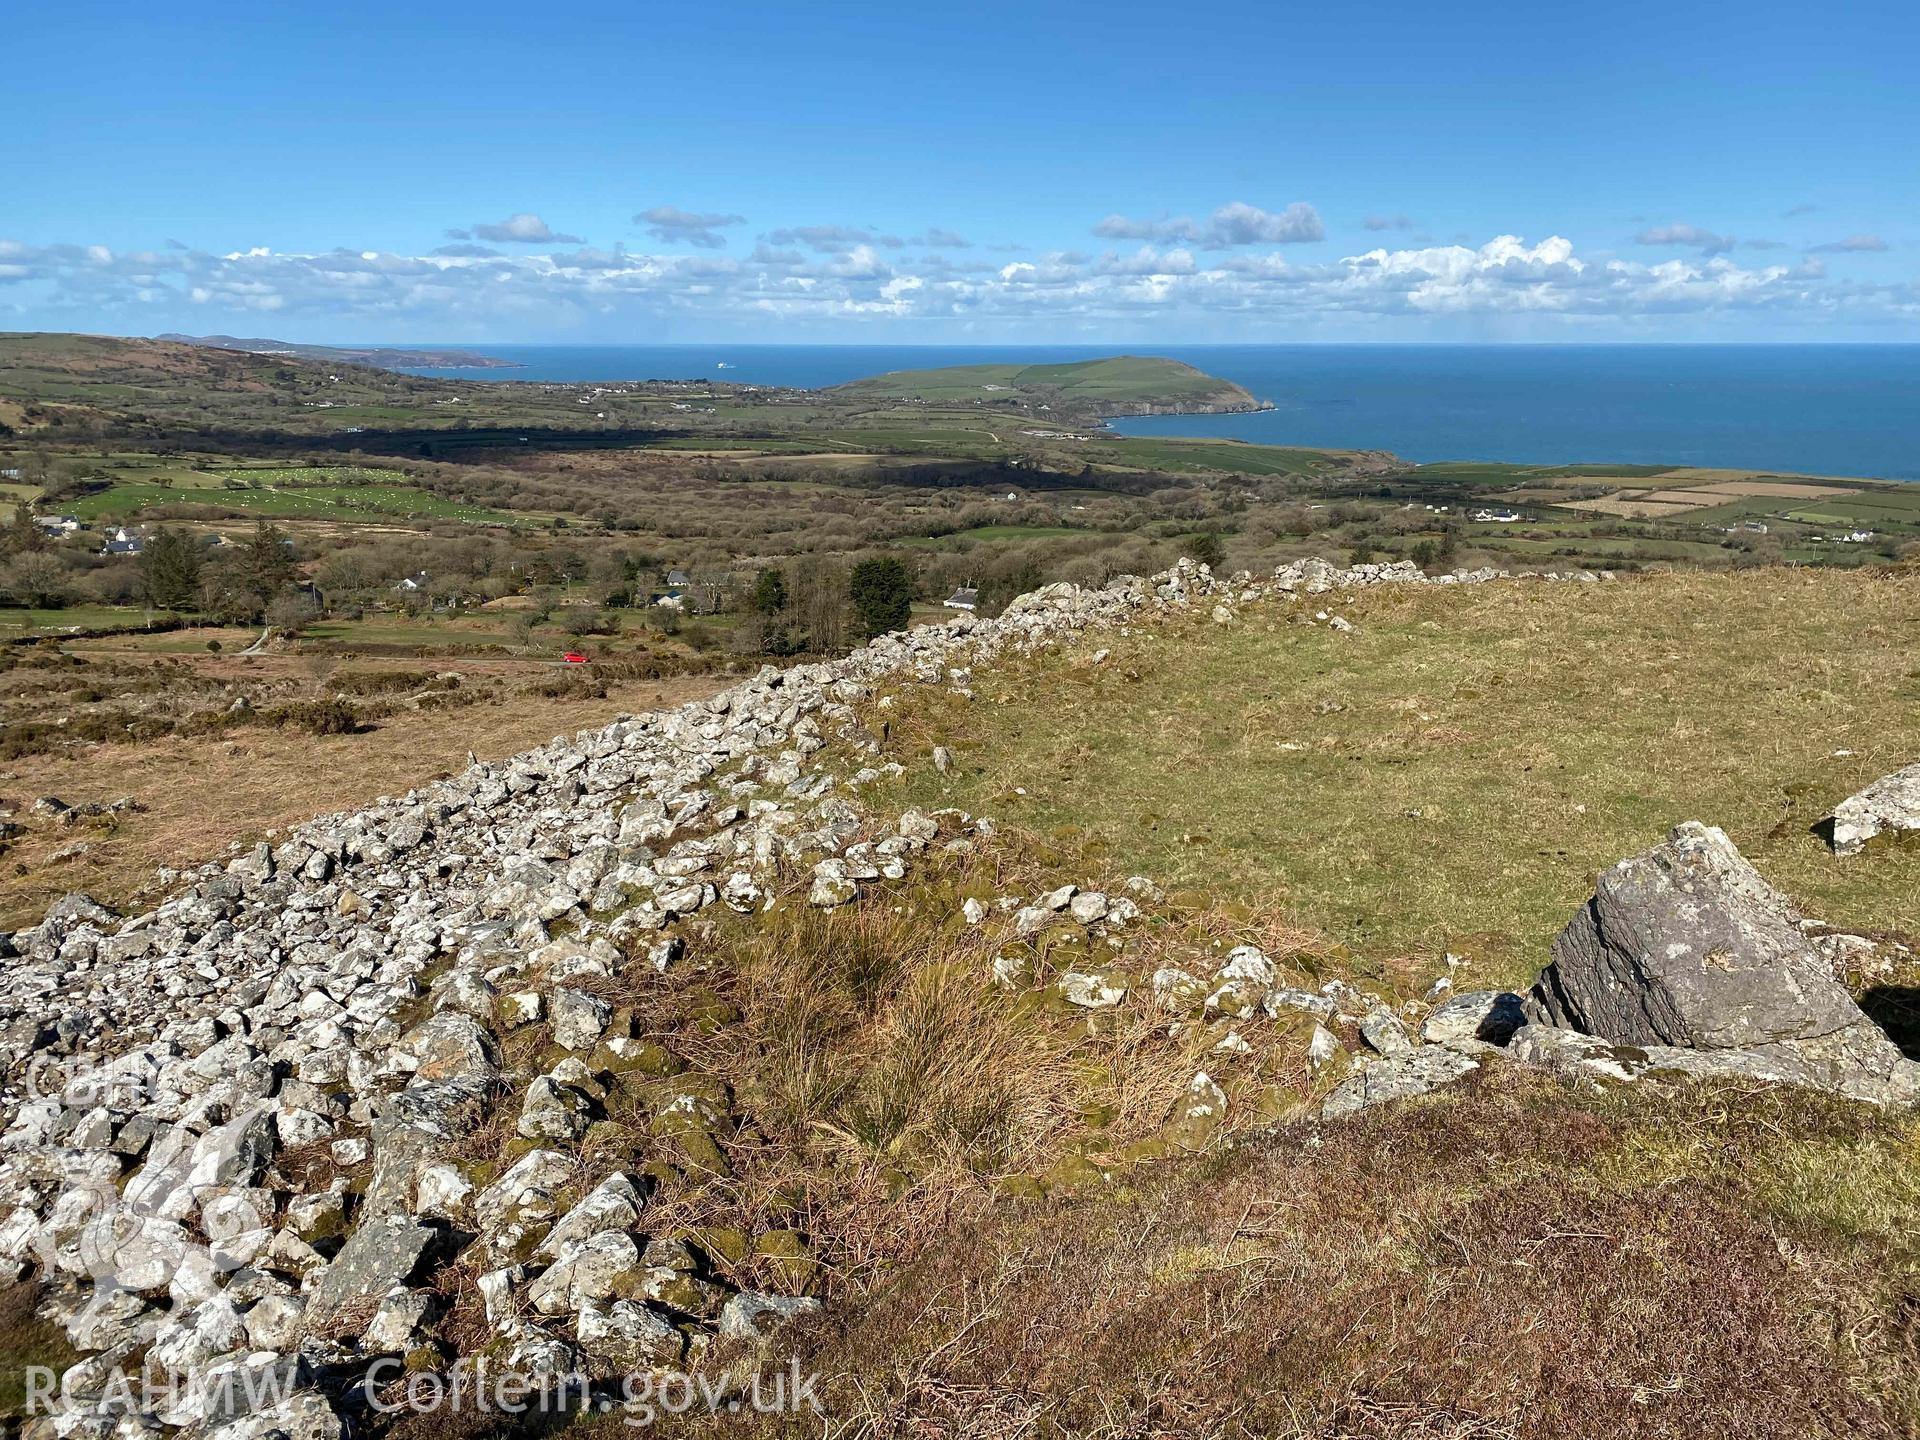 Digital photograph of Carn Ffoi defended enclosure, produced by Paul Davis in 2020